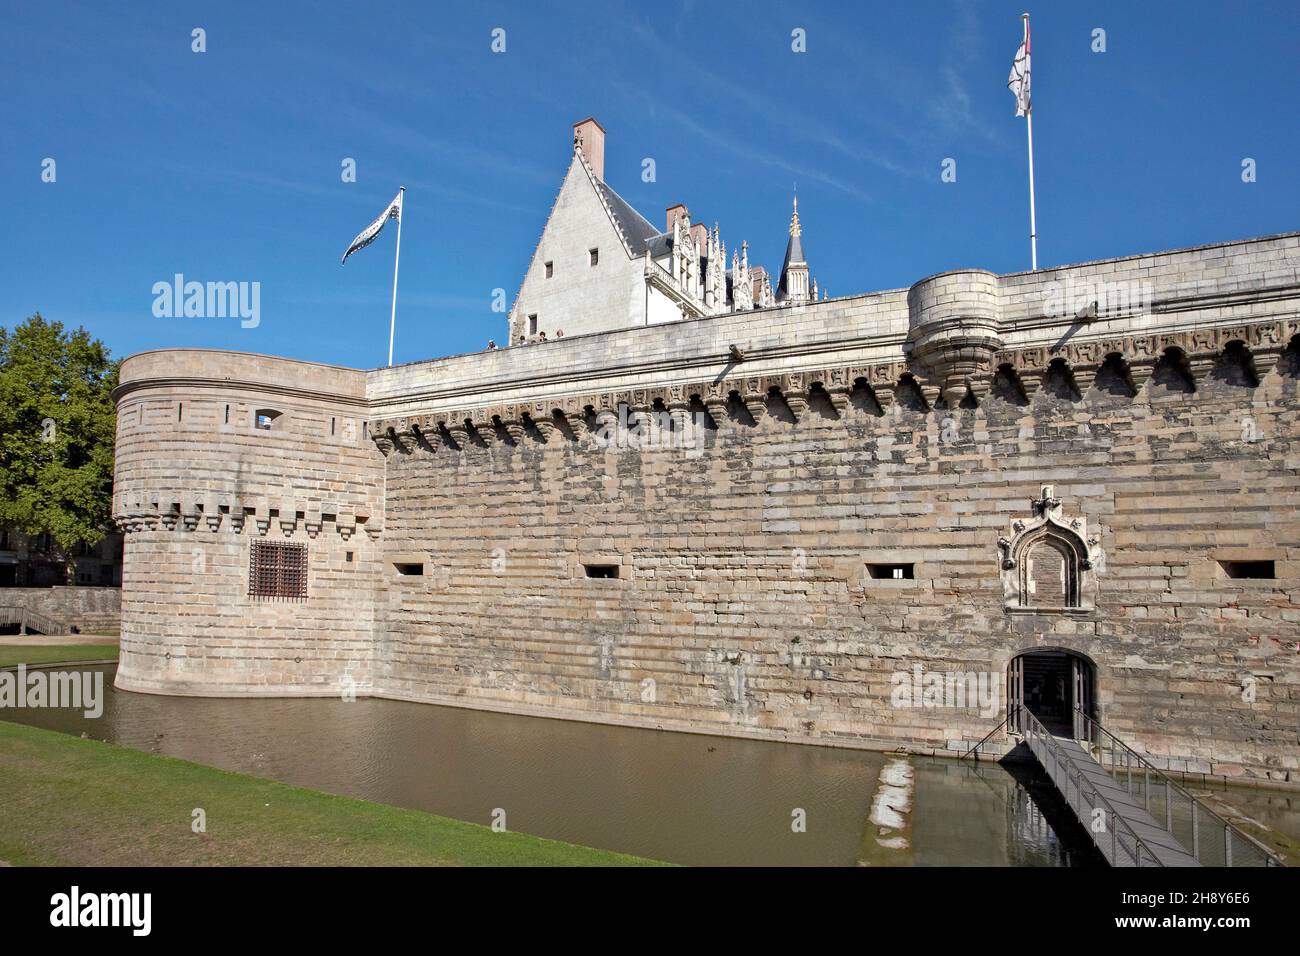 Castle of Dukes of Brittany. Nantes, Loire. France Stock Photo